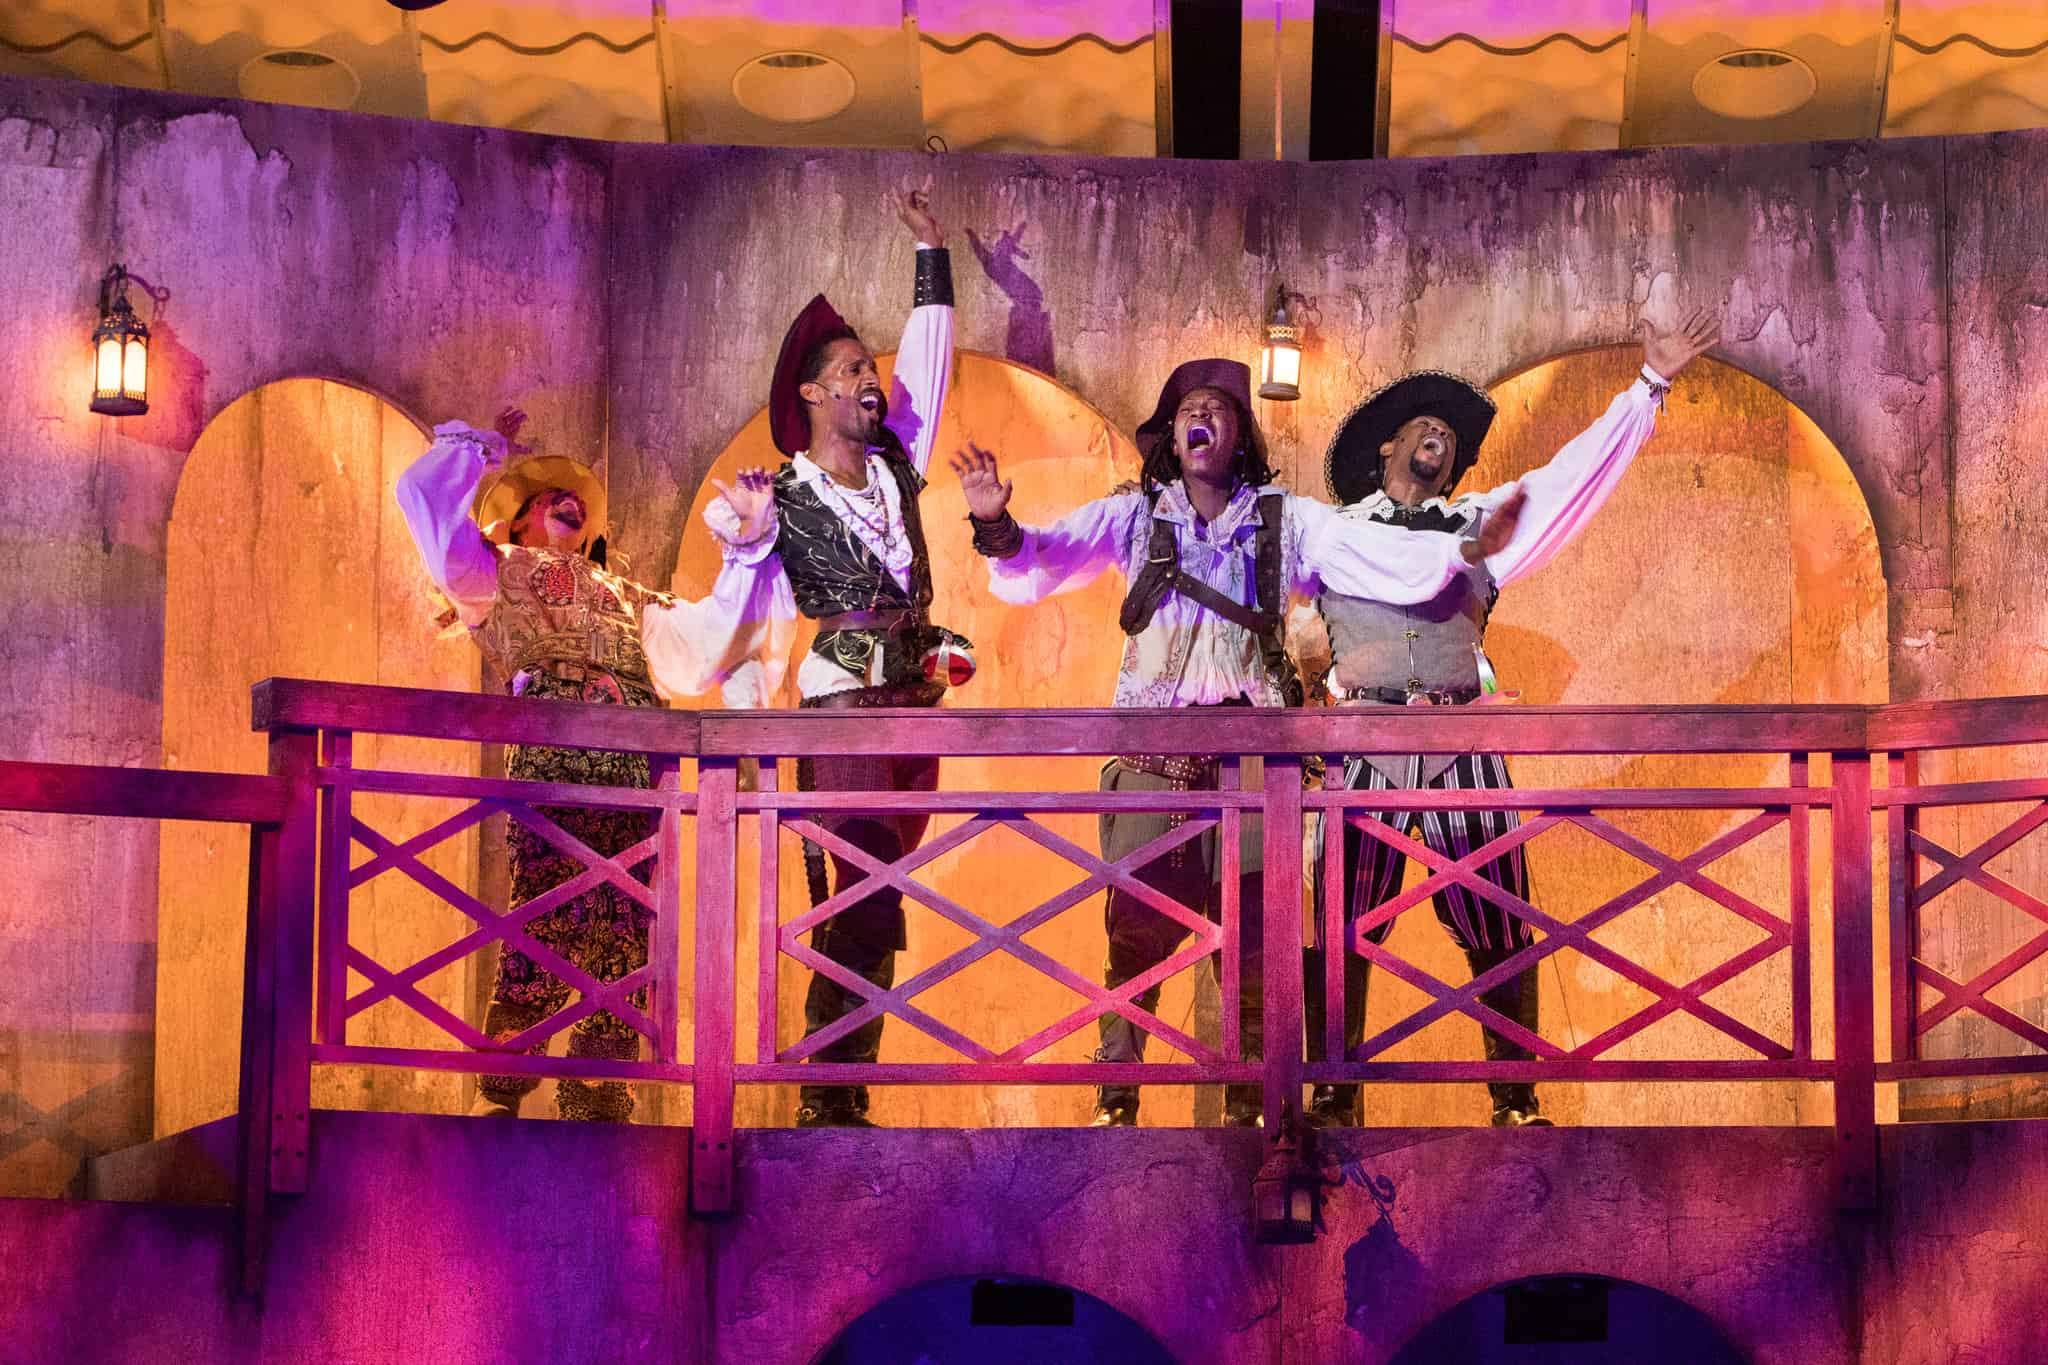 The Three Musketeers by The Classical Theatre of Harlem